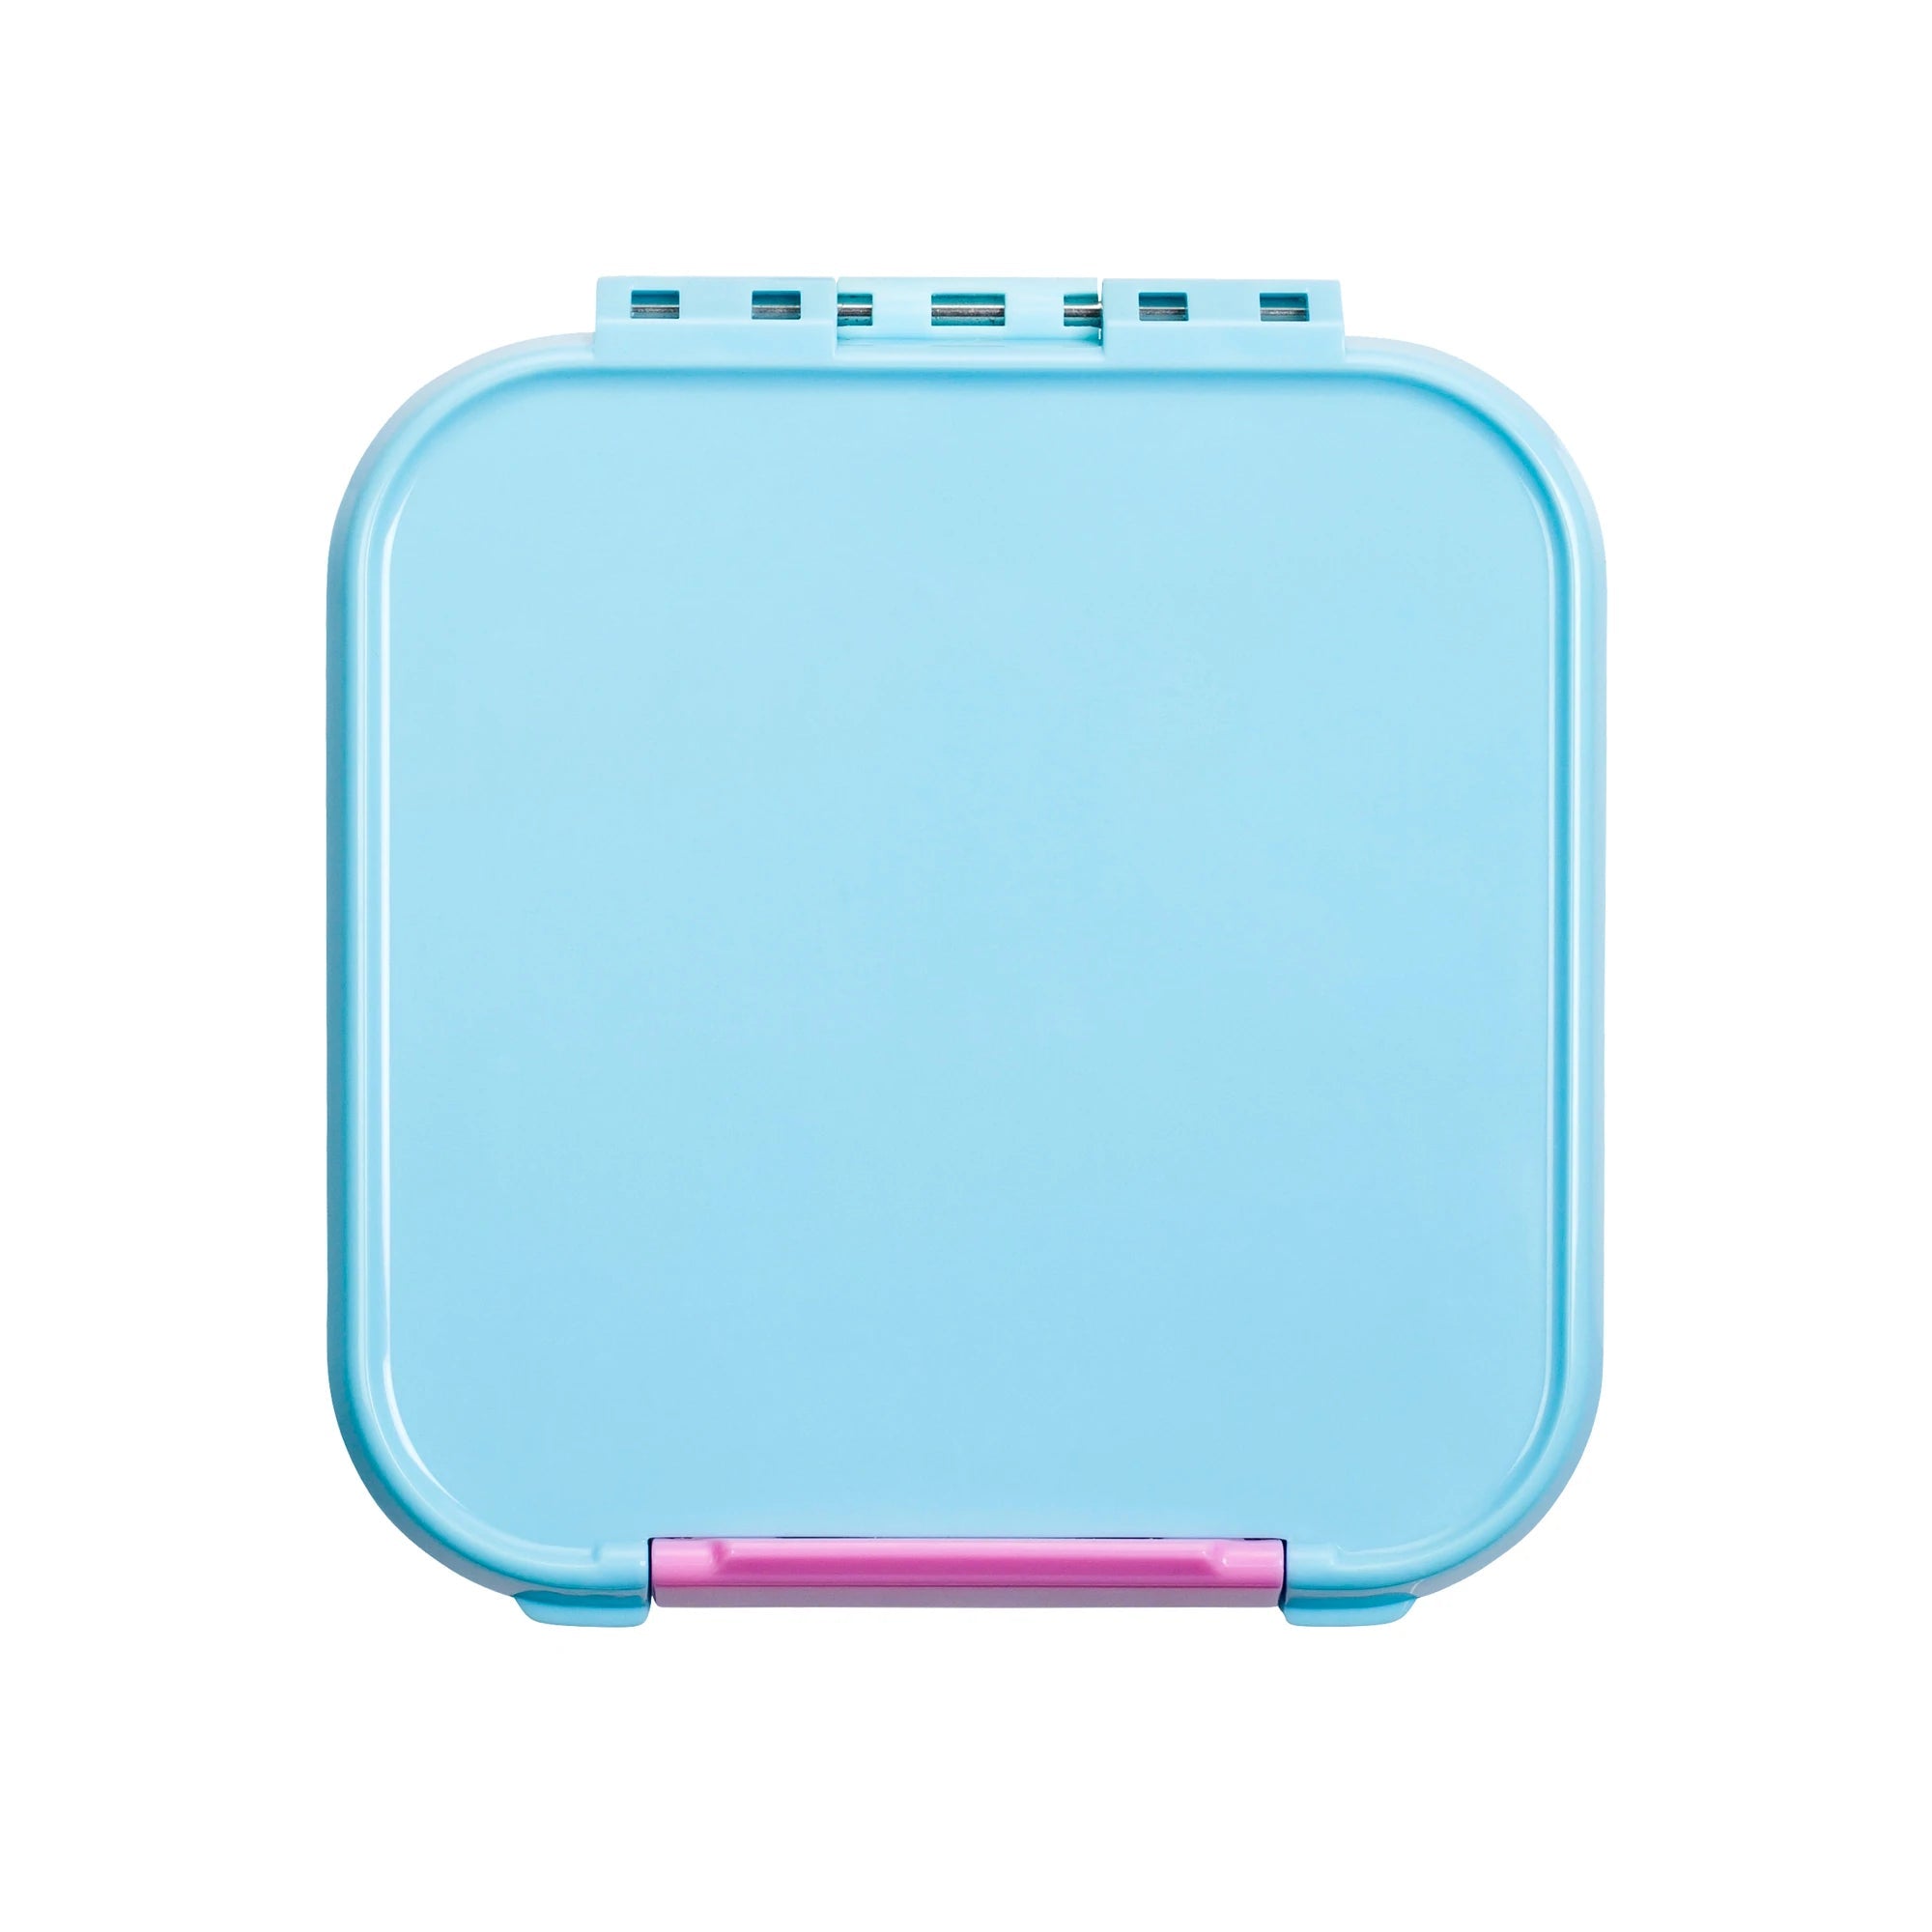 Little Lunch Box Co. Bento Two (Snack Size): Sky Blue Bento Box by Little Lunch Box Co. | Cute Kid Stuff